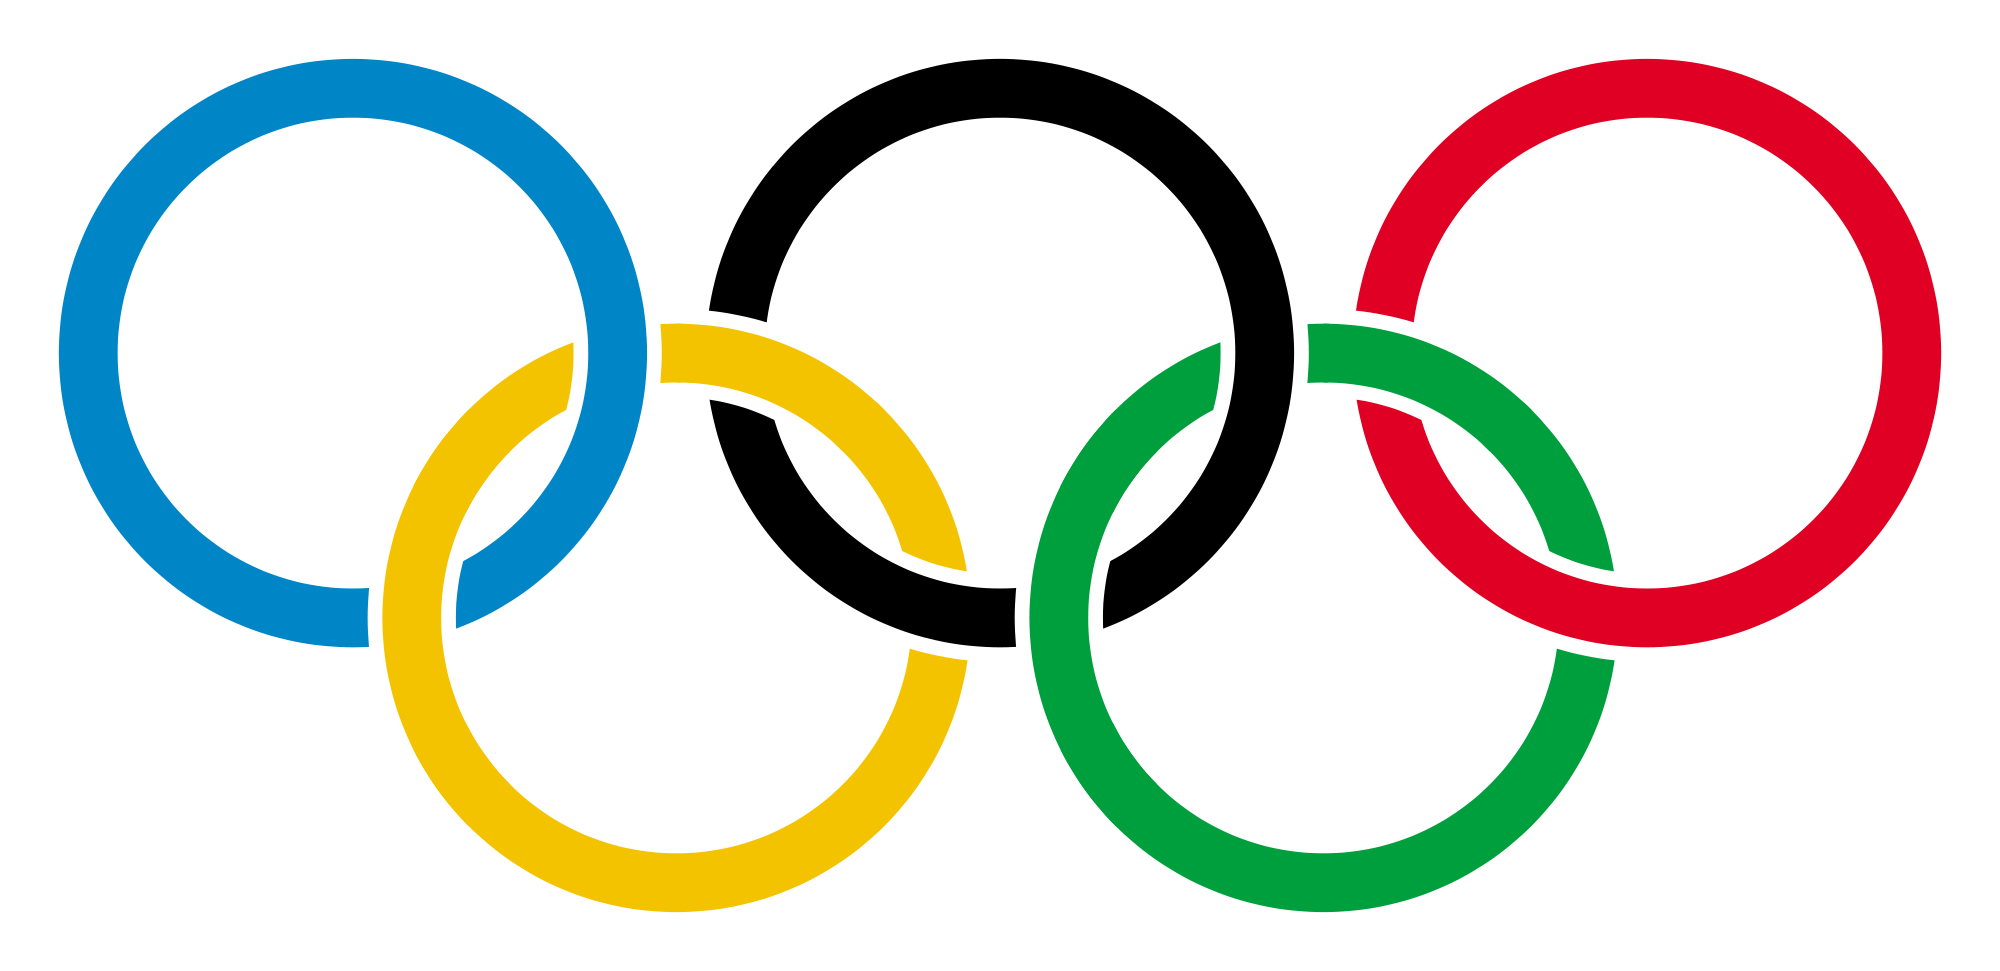 Olympic Rings Png Picture - Olympic Rings, Transparent background PNG HD thumbnail